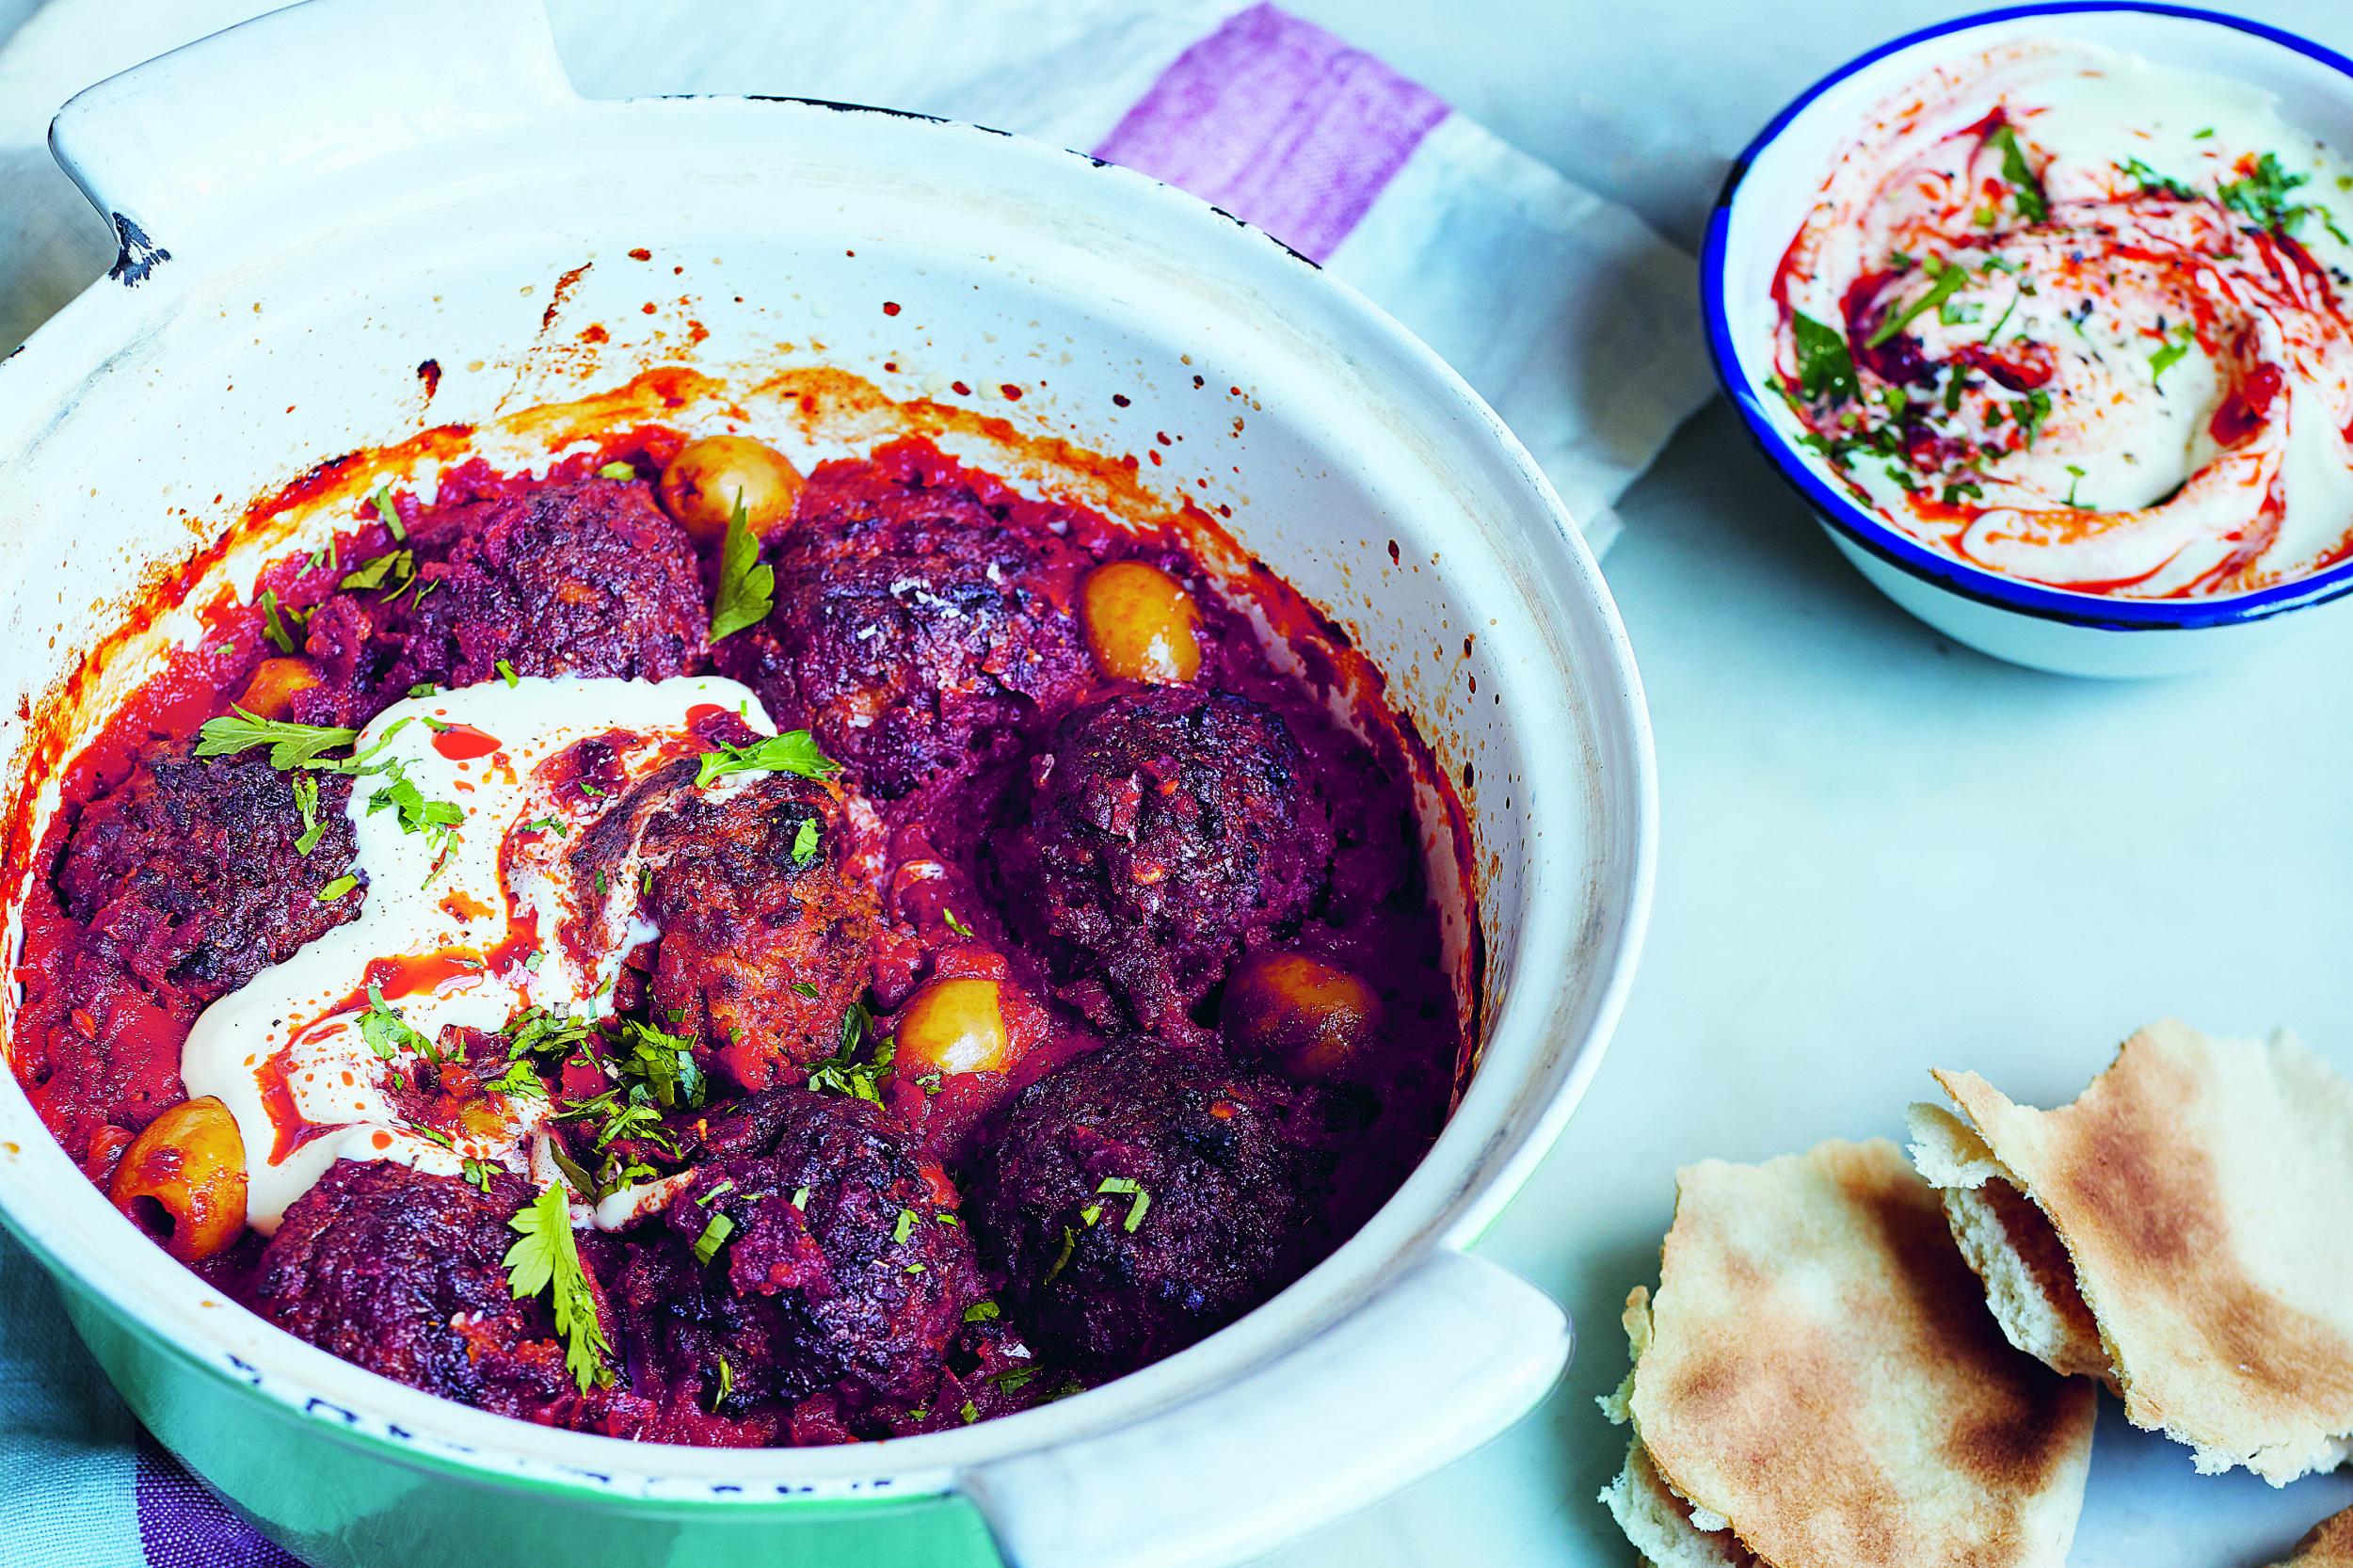 This one-pot baked harissa falafel recipe uses tinned tomatoes, ready-to-eat falafel, onions and olives